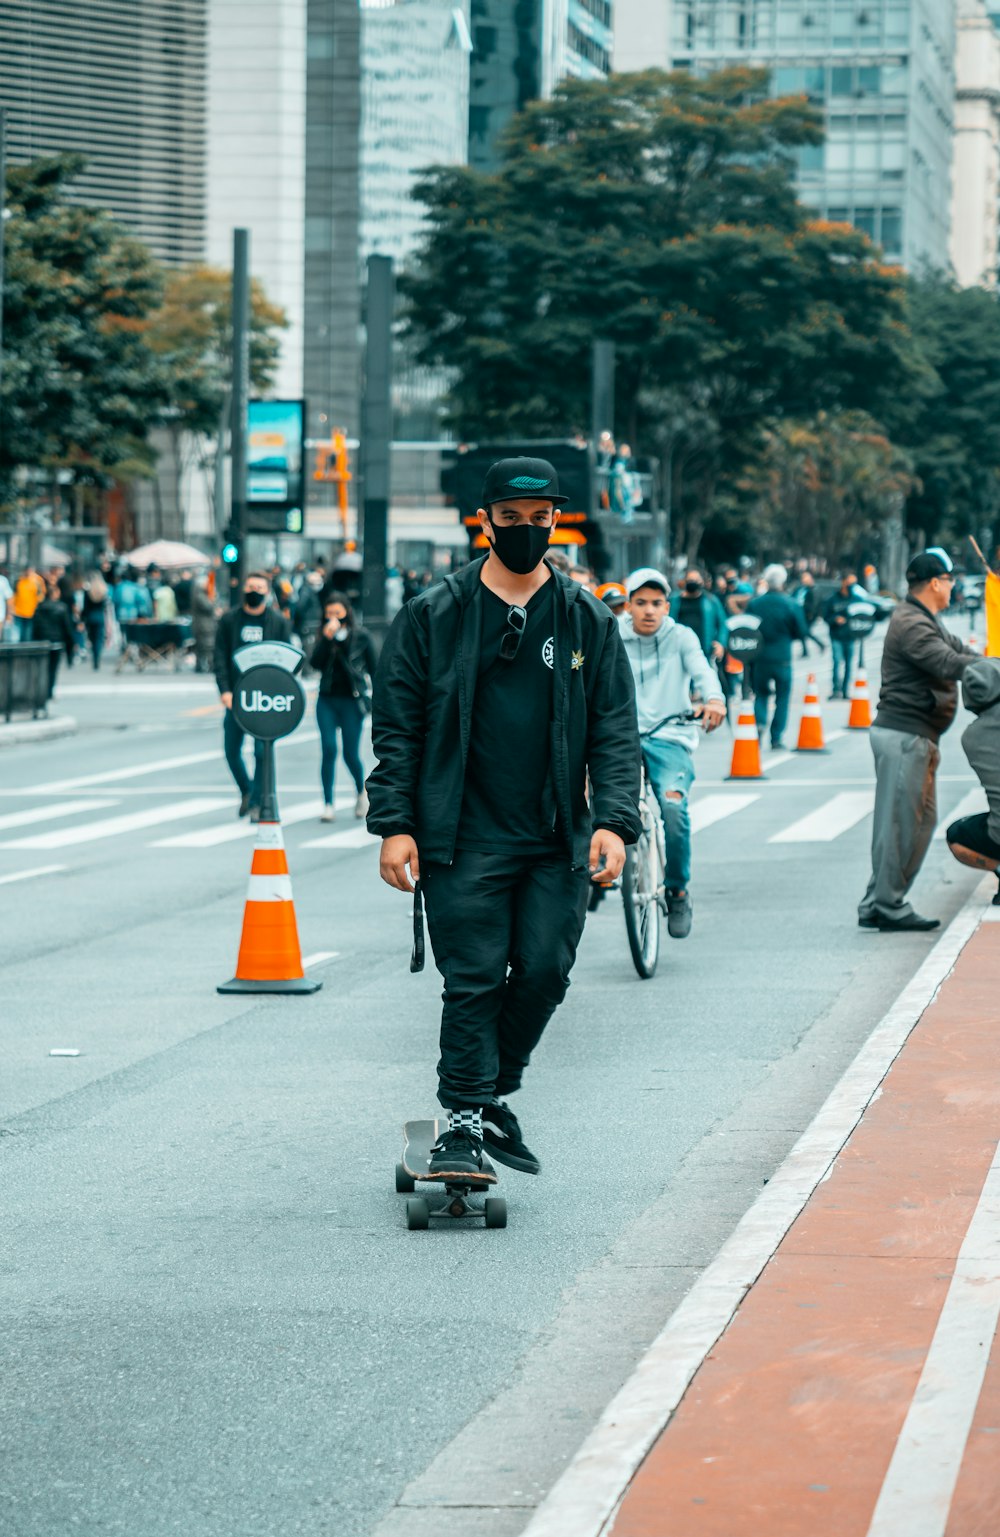 man in black jacket and black cap riding on black kick scooter on gray concrete road